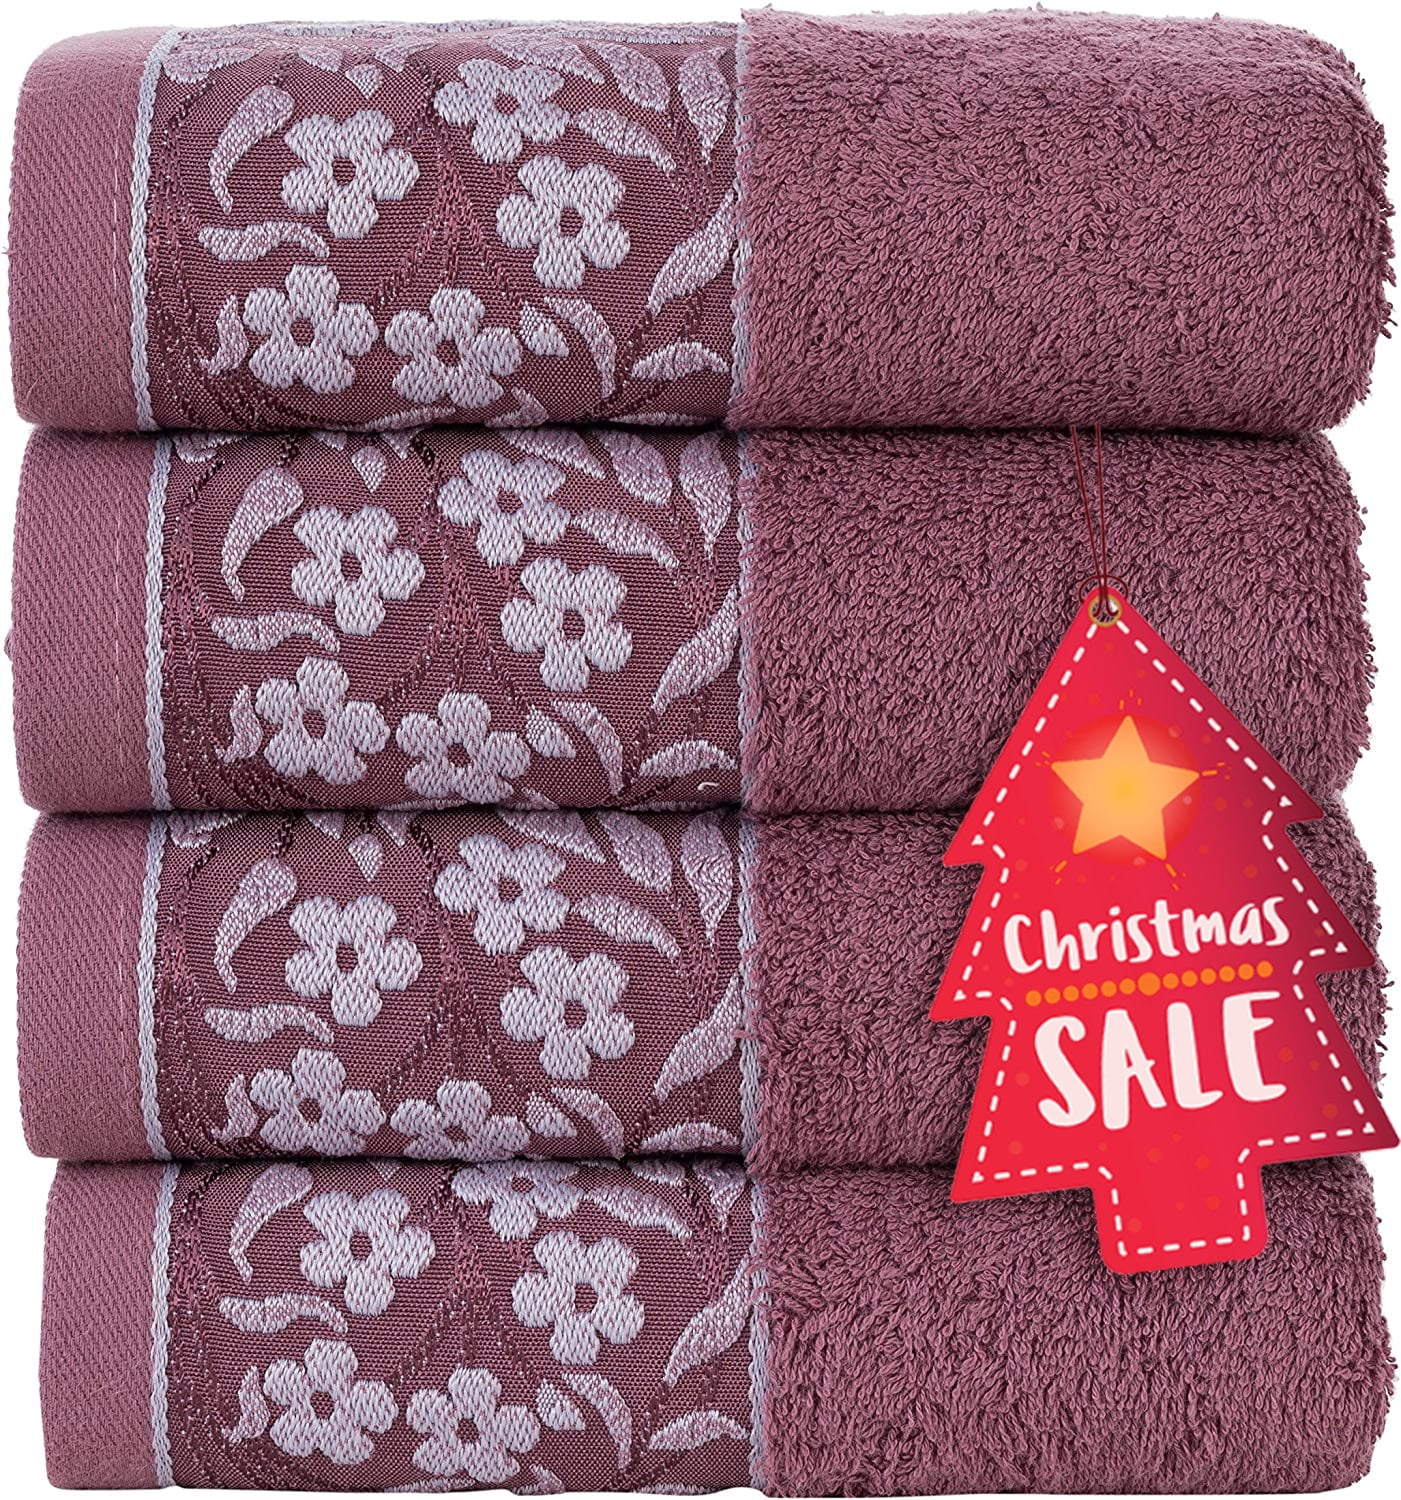 HALLEY Decorative Bath Towels Set, 6 Piece - Turkish Towel Set with Floral  Pattern, Highly Absorbent & Fade Resistant Fabric, 100% Cotton - Brown 